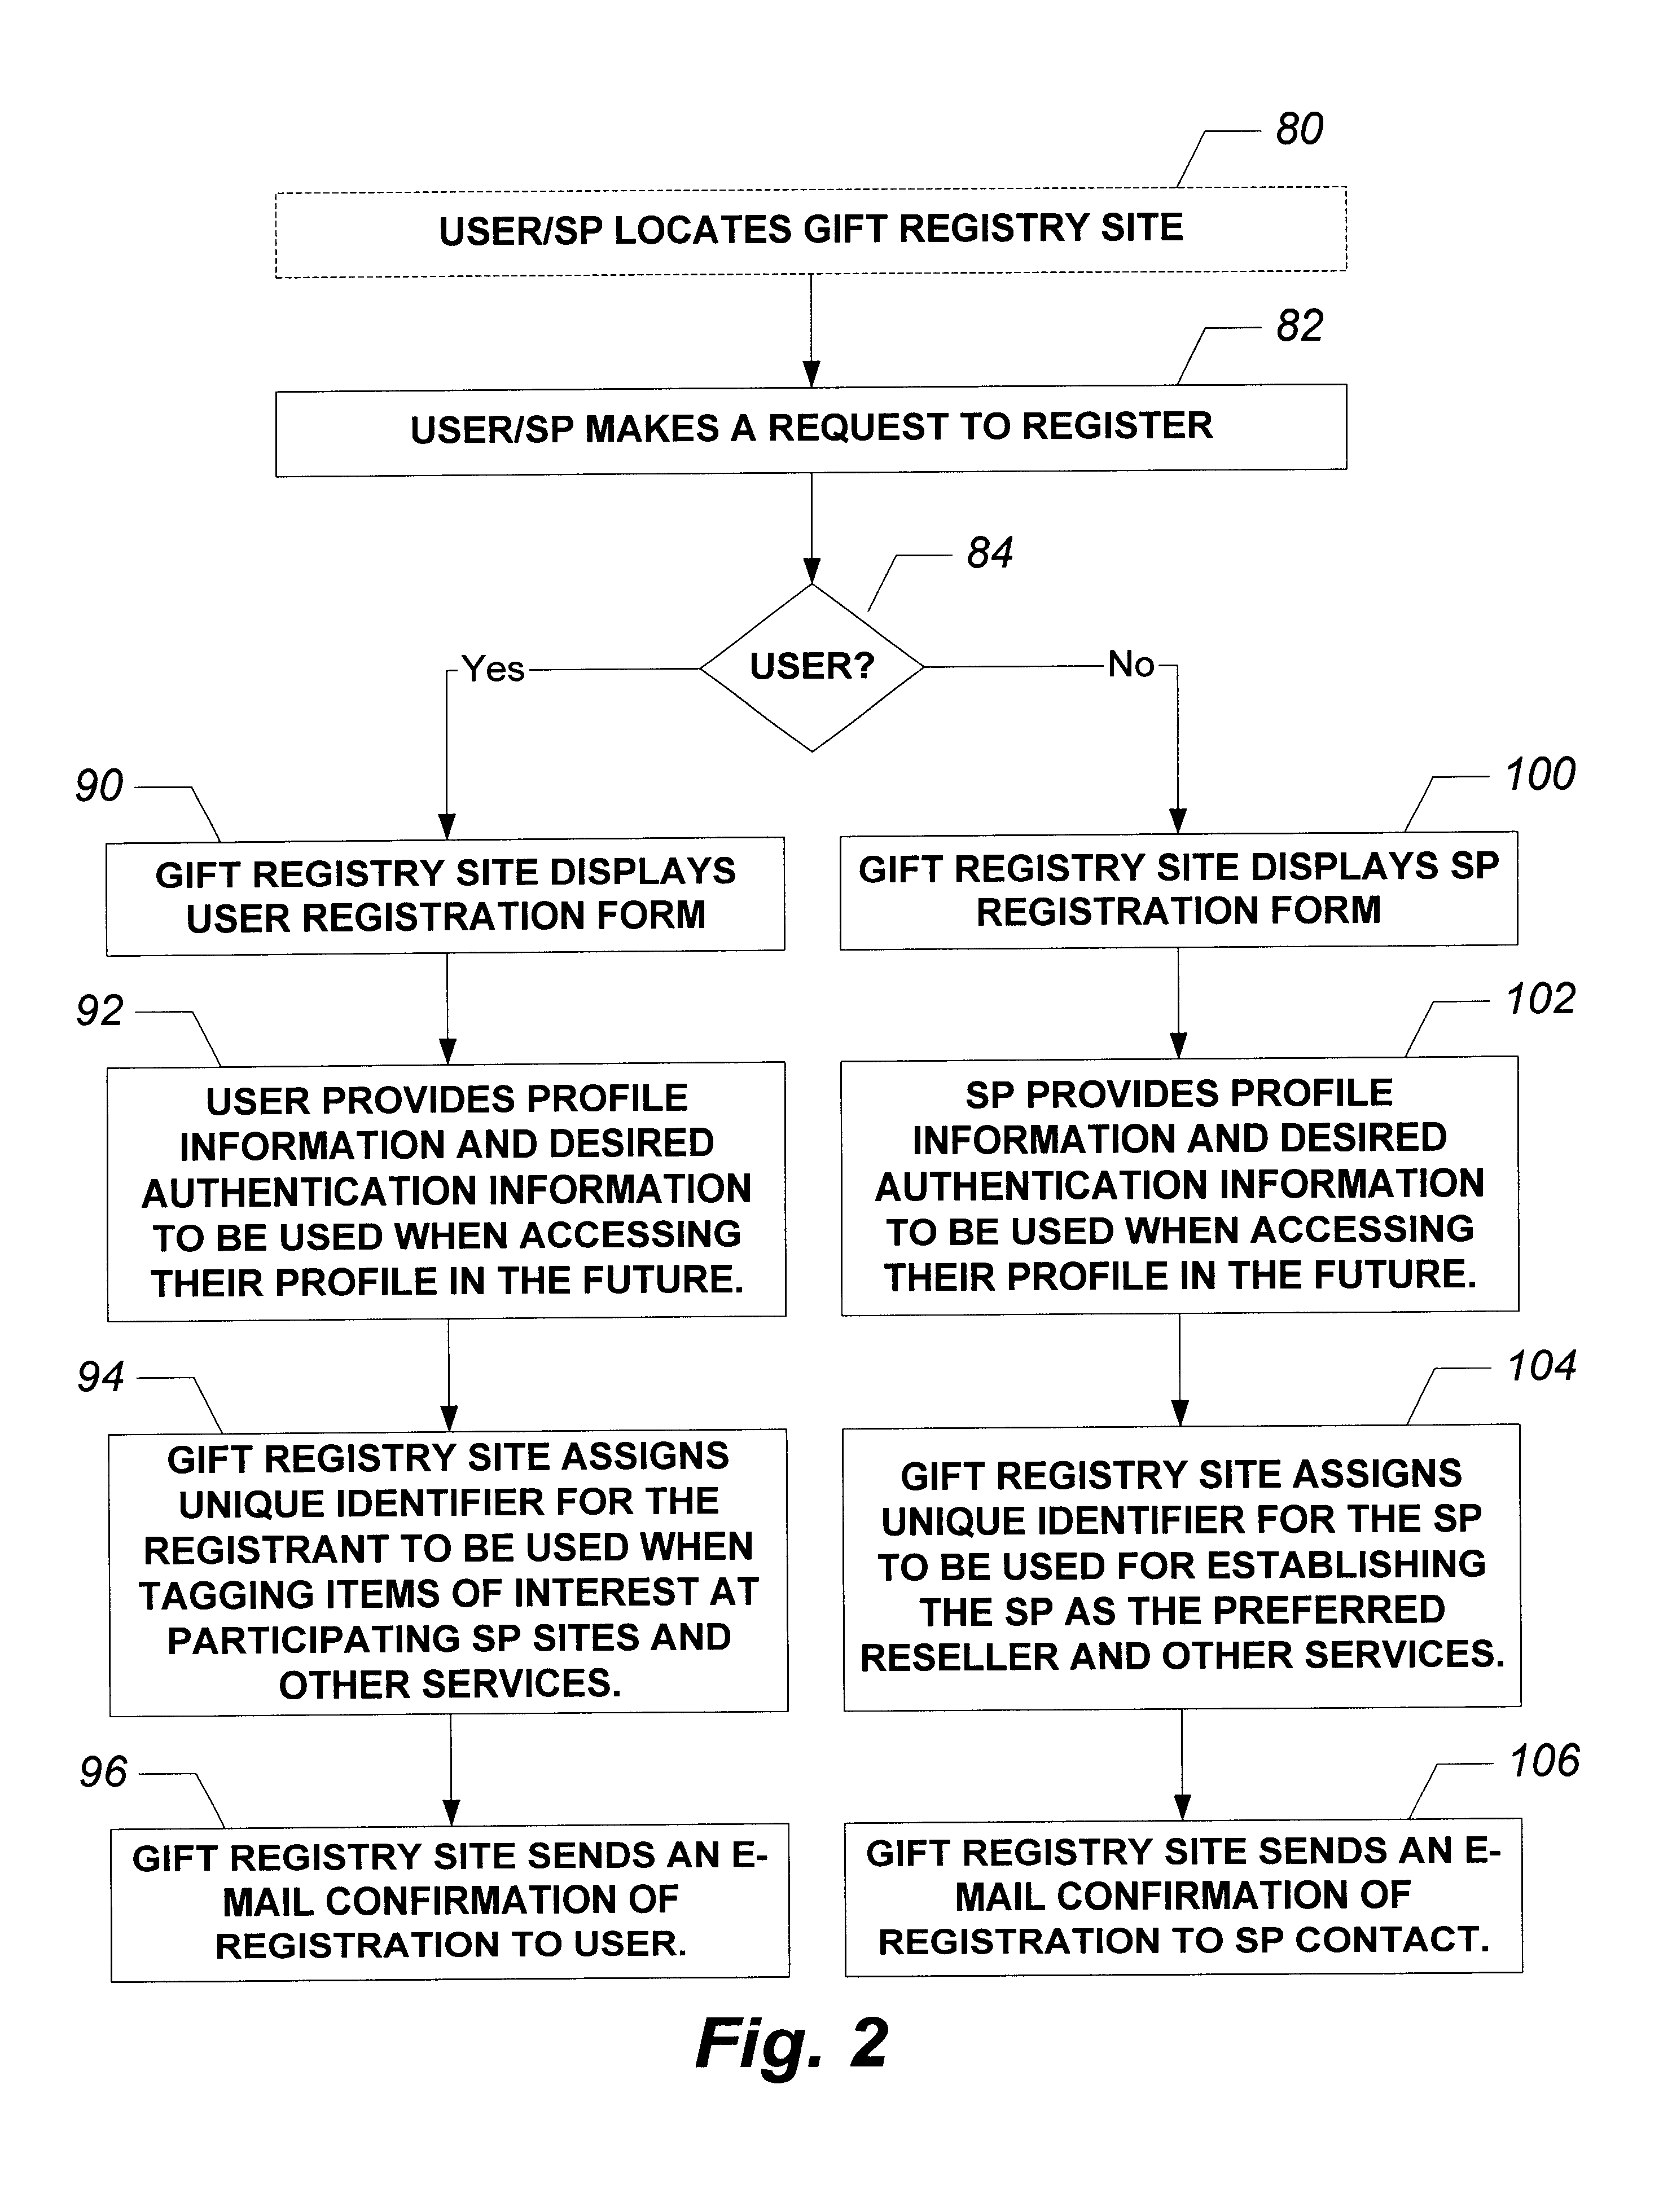 System and method for providing electronic multi-merchant gift registry services over a distributed network